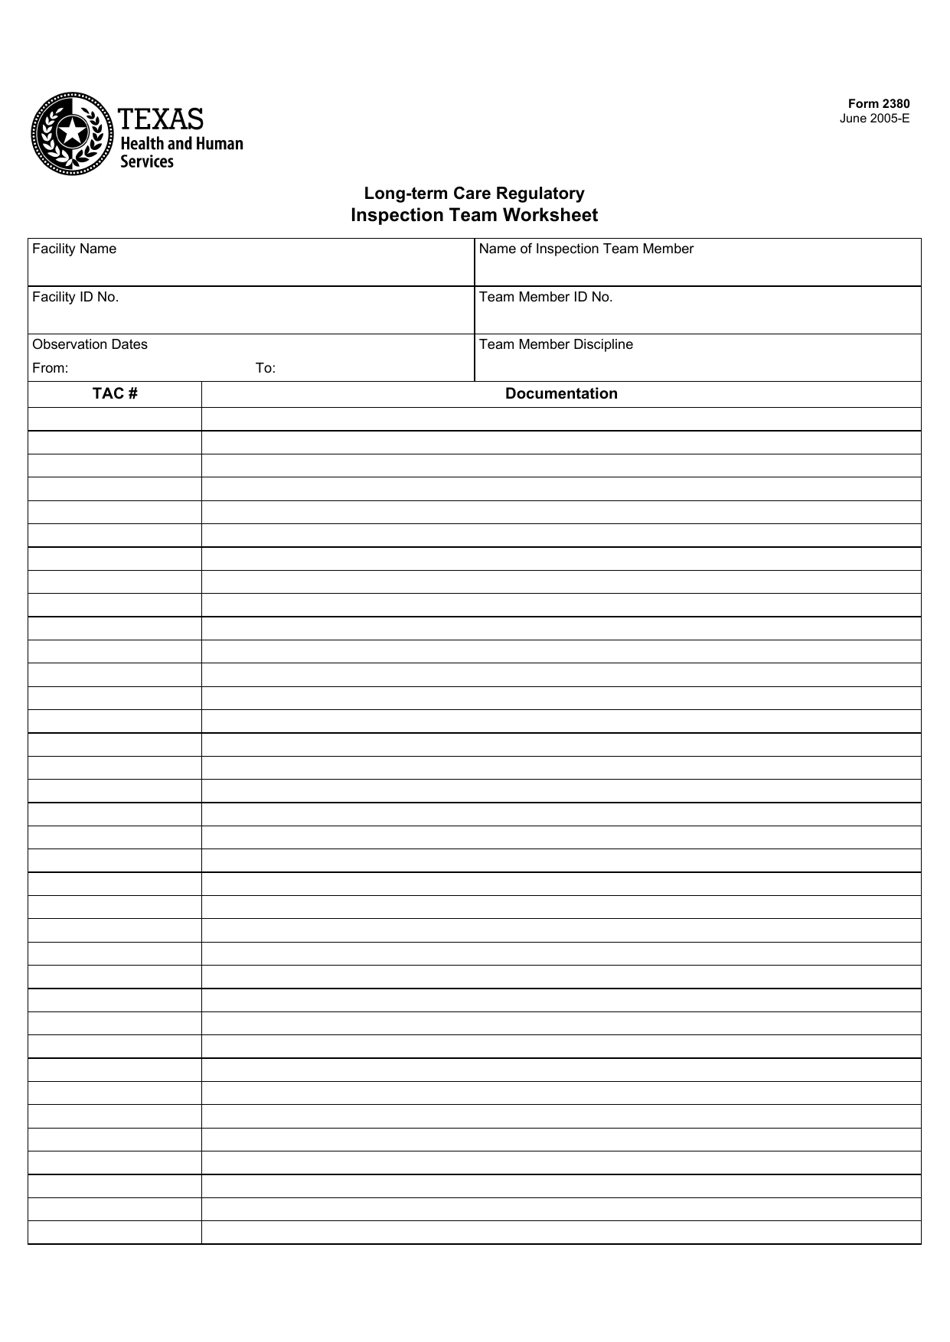 Form 2380 Long-Term Care Regulatory Inspection Team Worksheet - Texas, Page 1